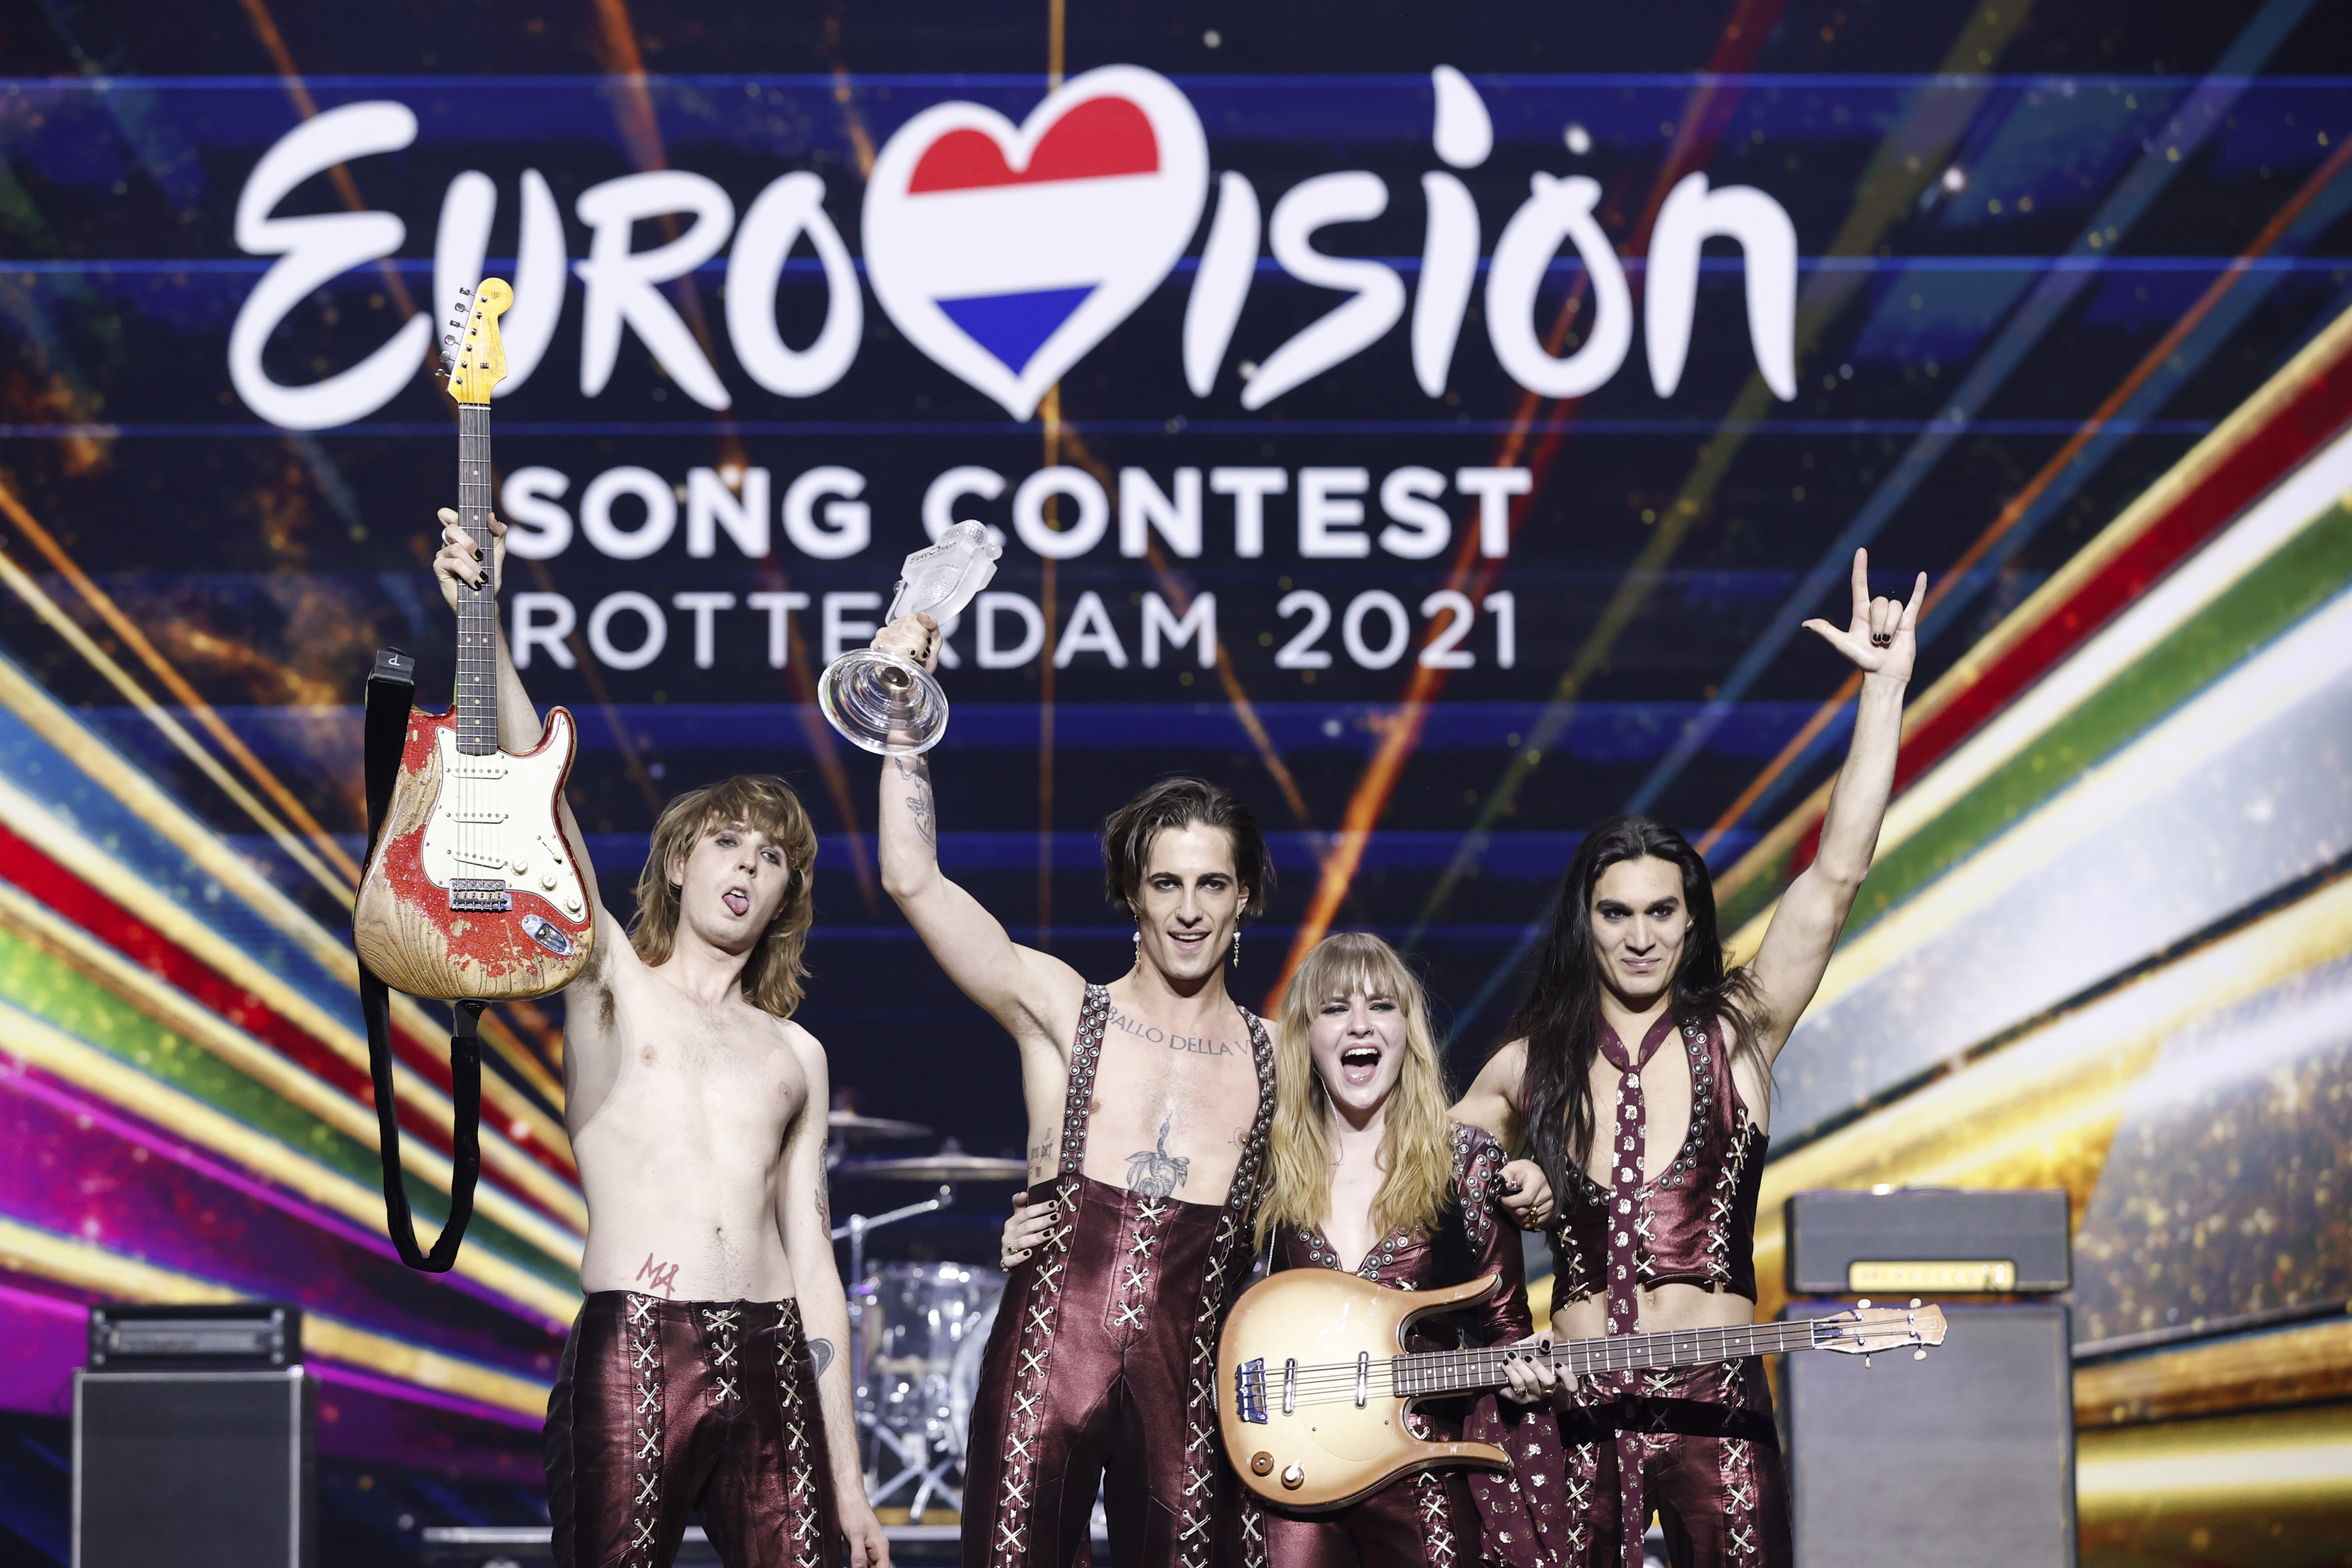 Update: Russia excluded from Eurovision Song Contest, Finland participates